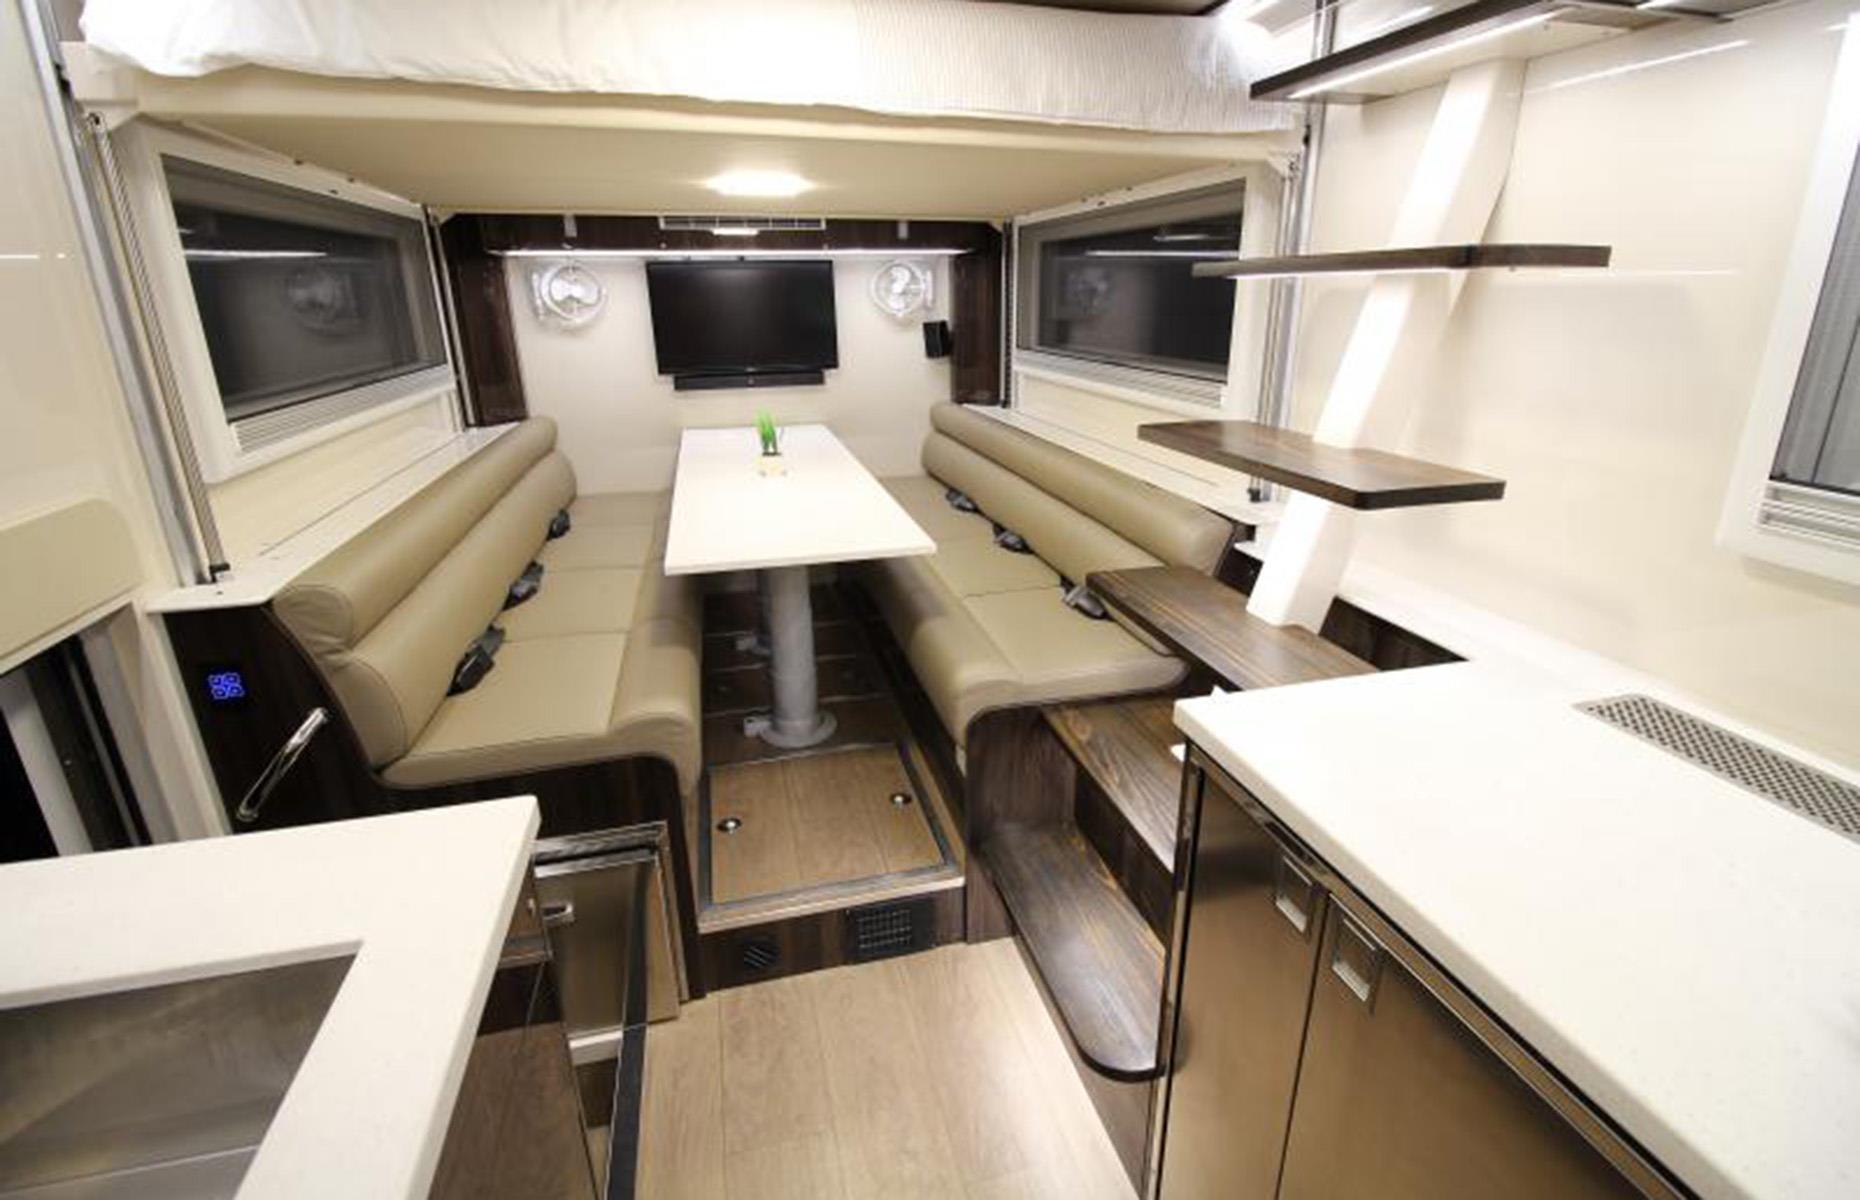 Not one to sacrifice style for substance, the bespoke motorhome also includes a master suite complete with a full bathroom. There's even the optional addition of a lift-up electric bed with a lounge space underneath – the perfect solution for guest accommodation.